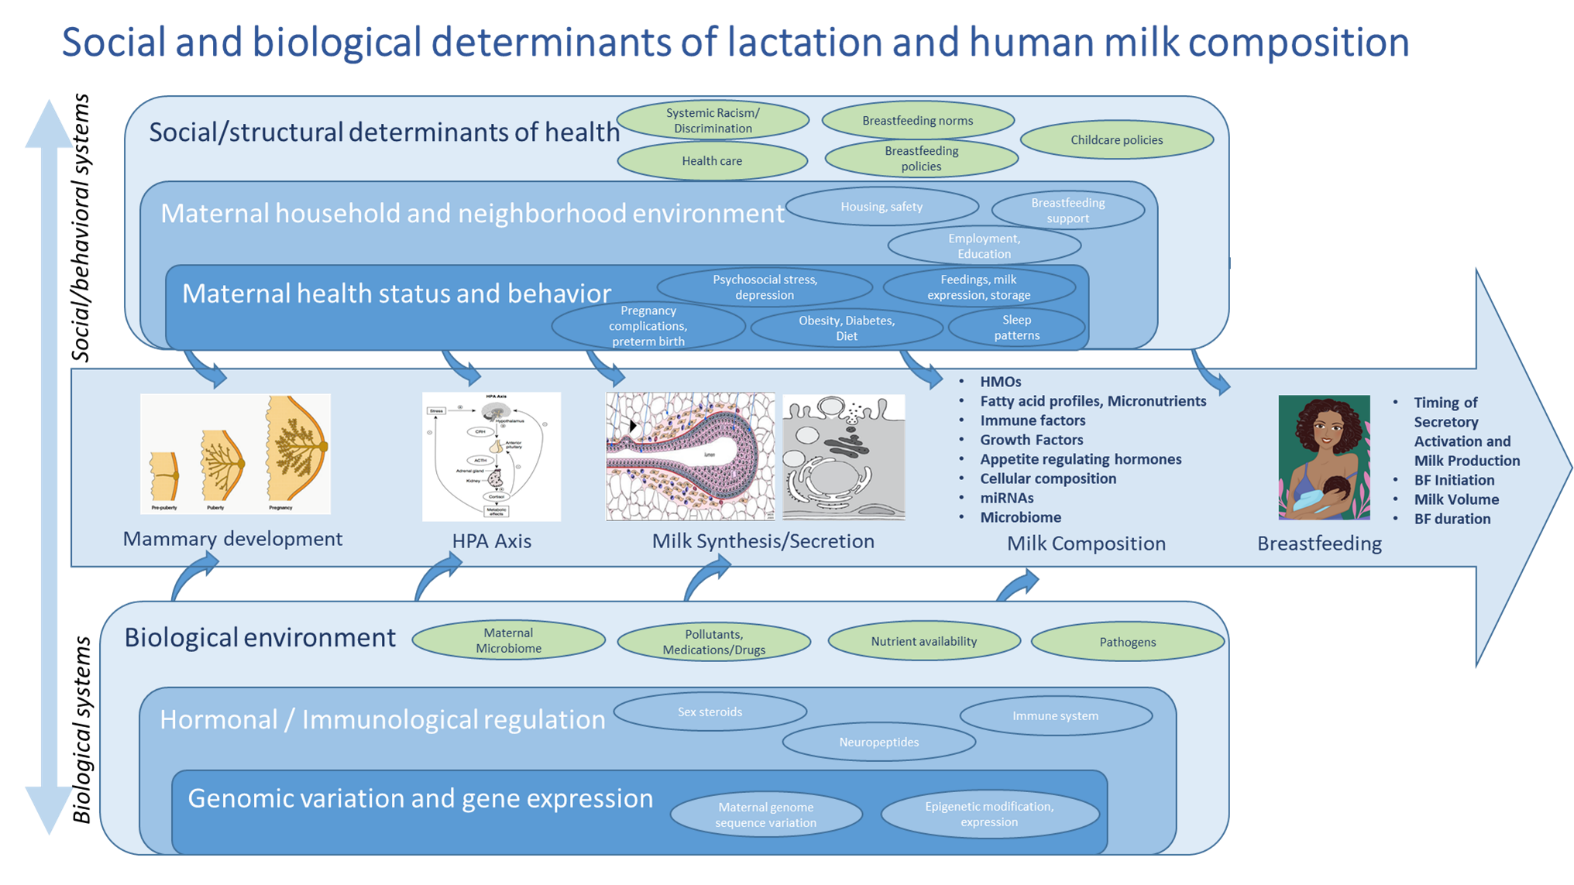 Social and biological determinants of lactation